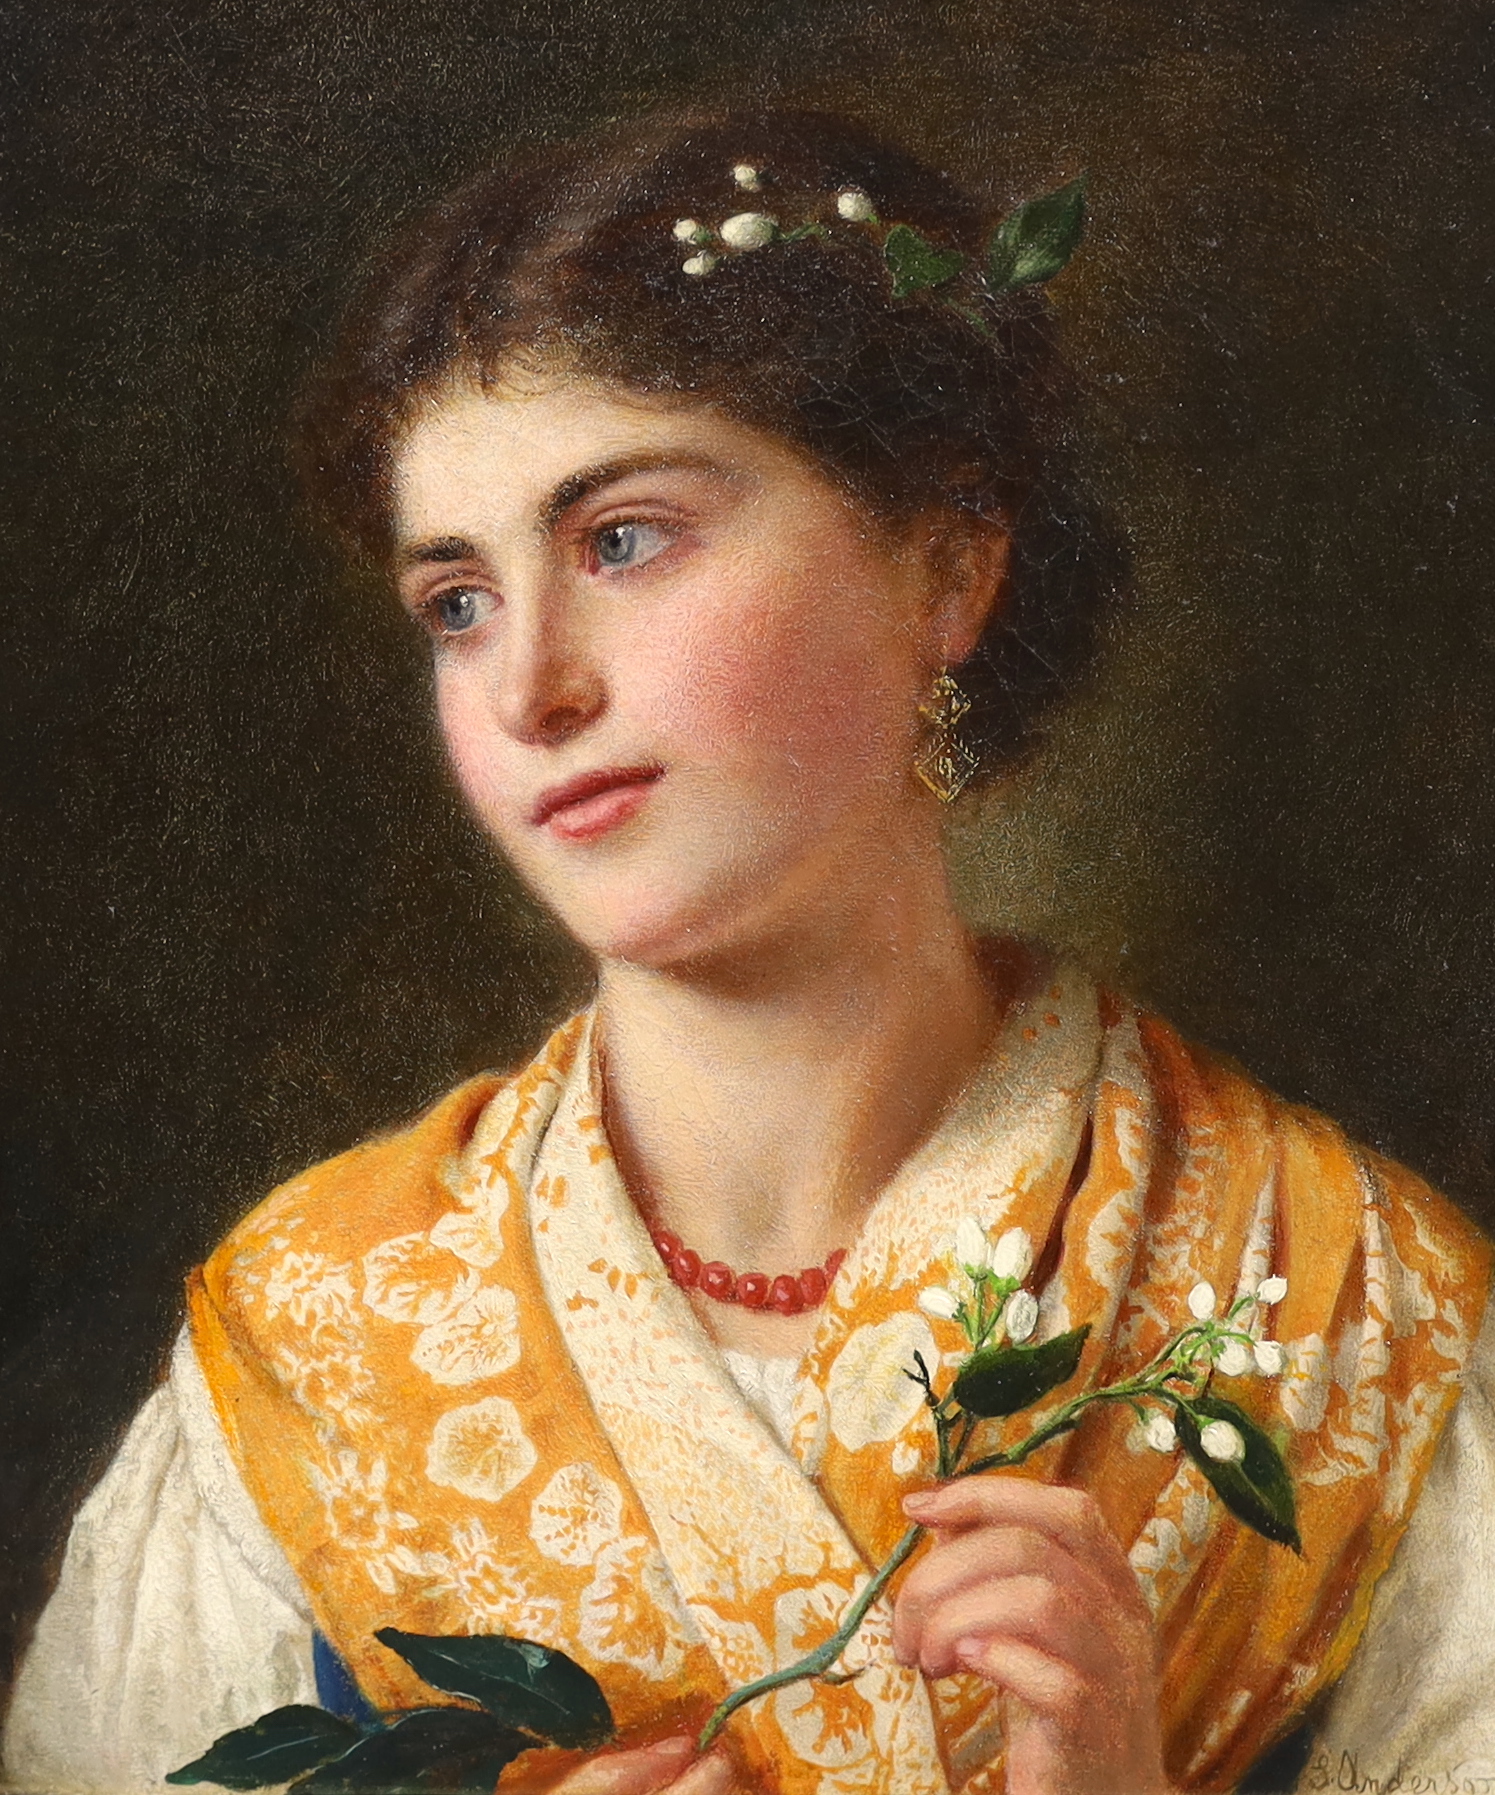 Sophie Gengembre Anderson (English, 1823-1903), A Classical Beauty, oil on canvas, 35 x 29.5cm